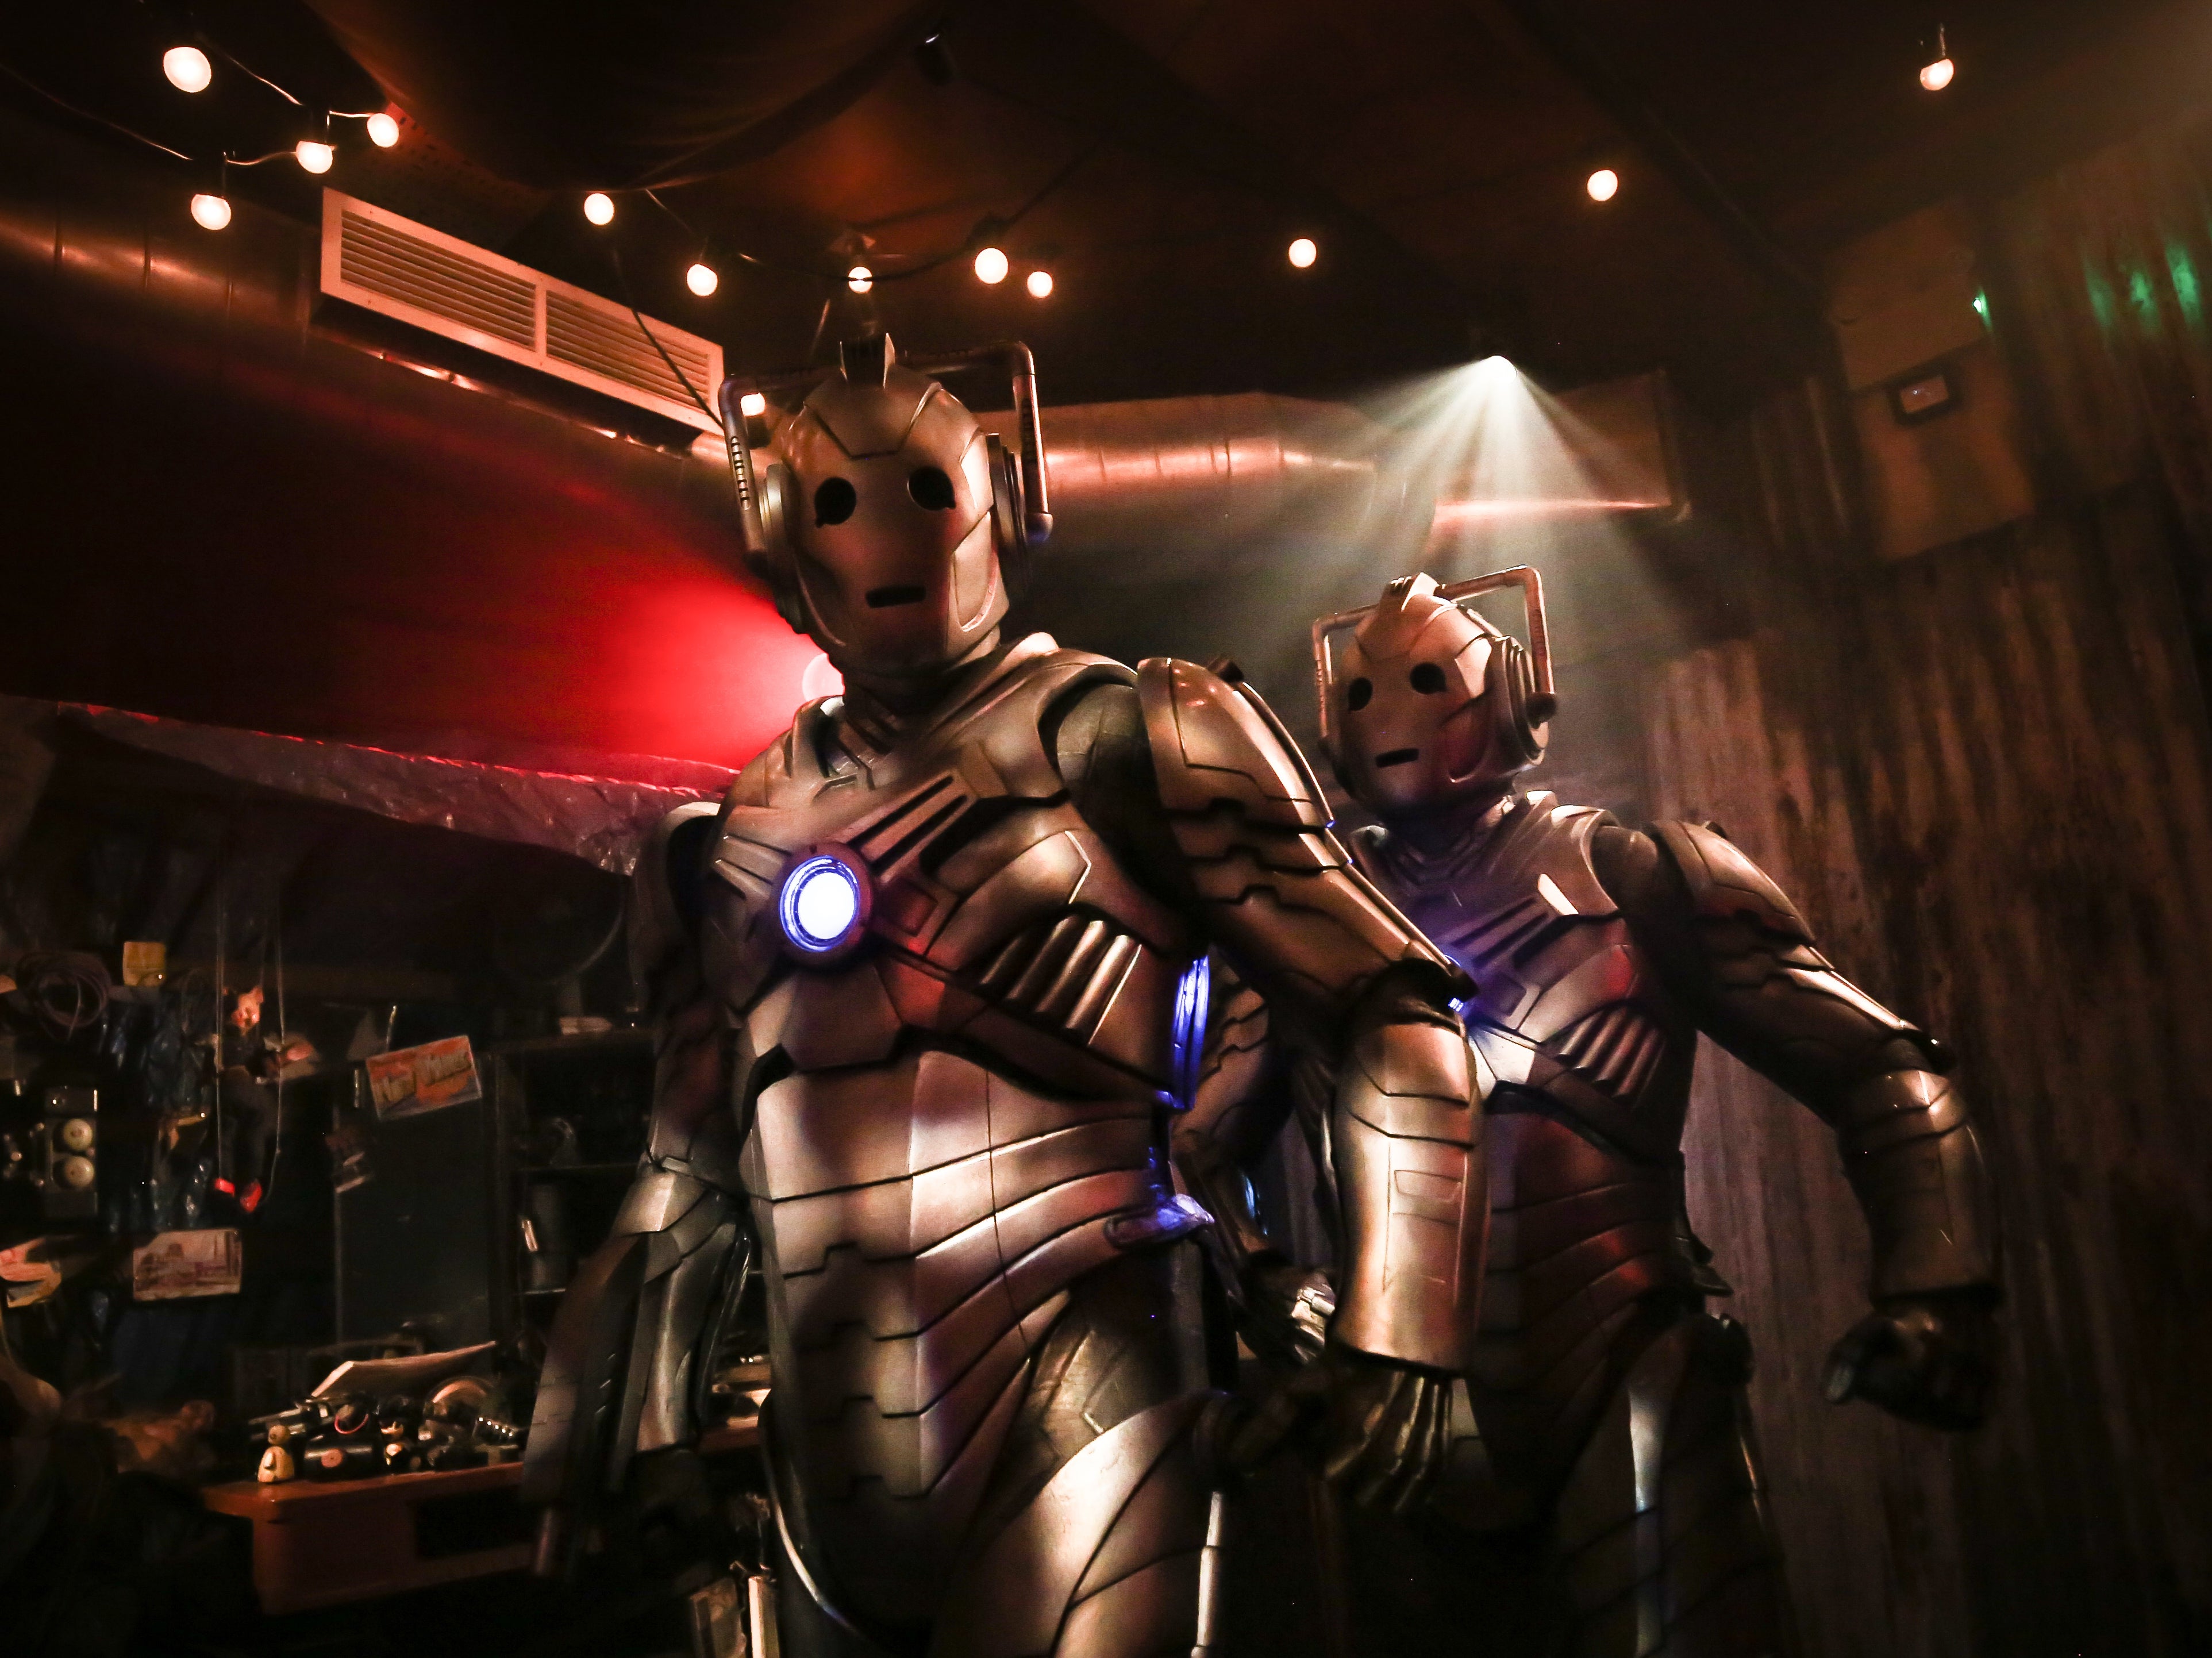 Steel yourself: Two Cybermen photographed during dress rehearsals for ‘Doctor Who: Time Fracture’